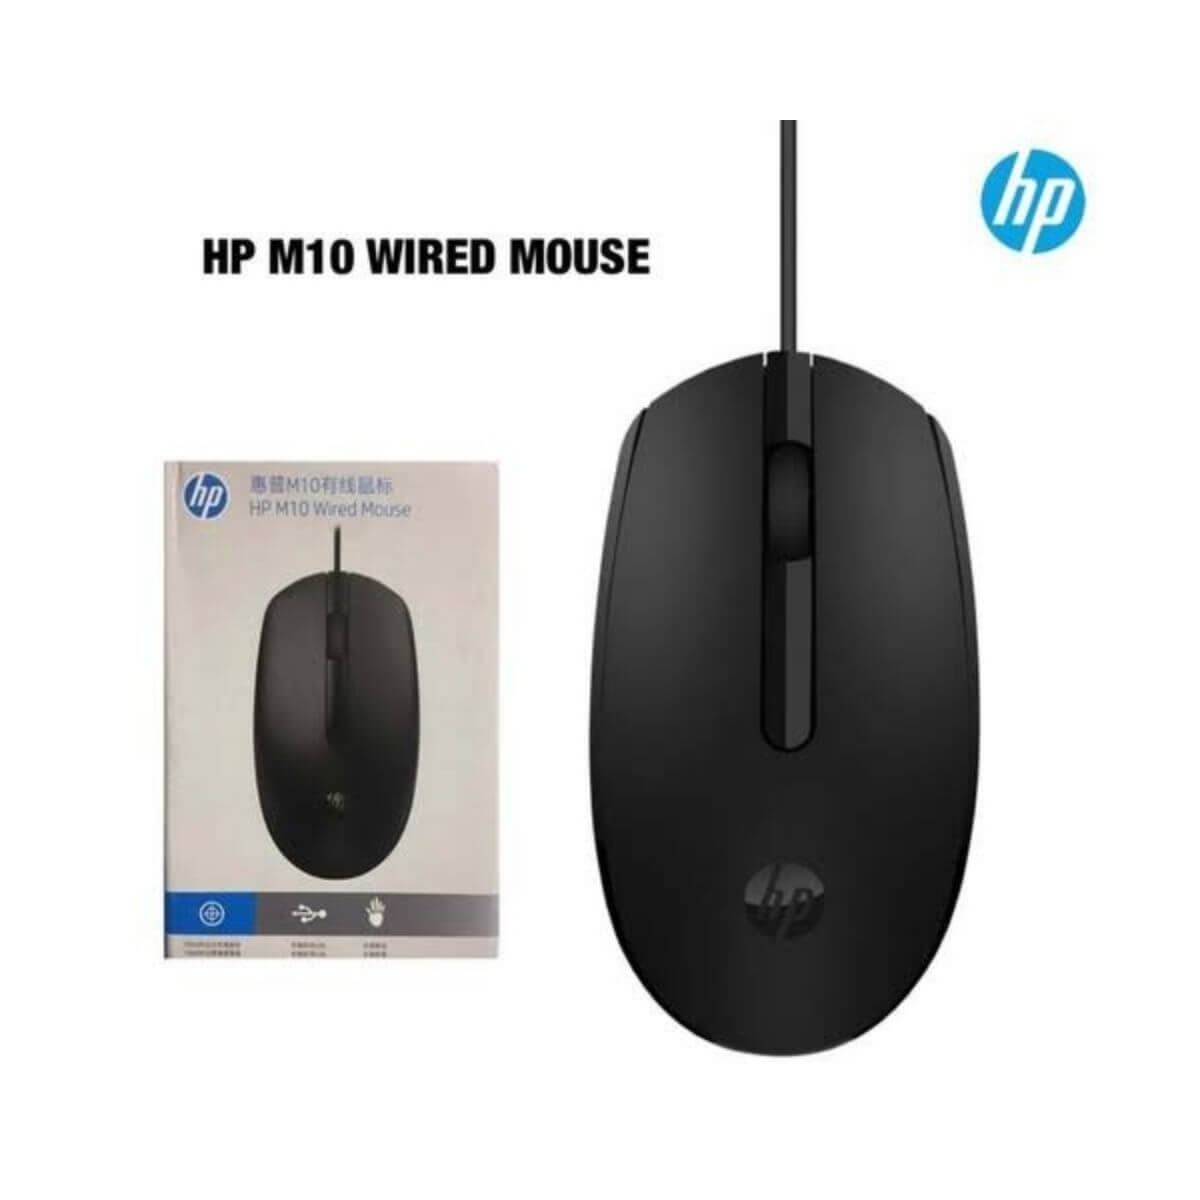 HP M10 Wired Mouse CopyBD